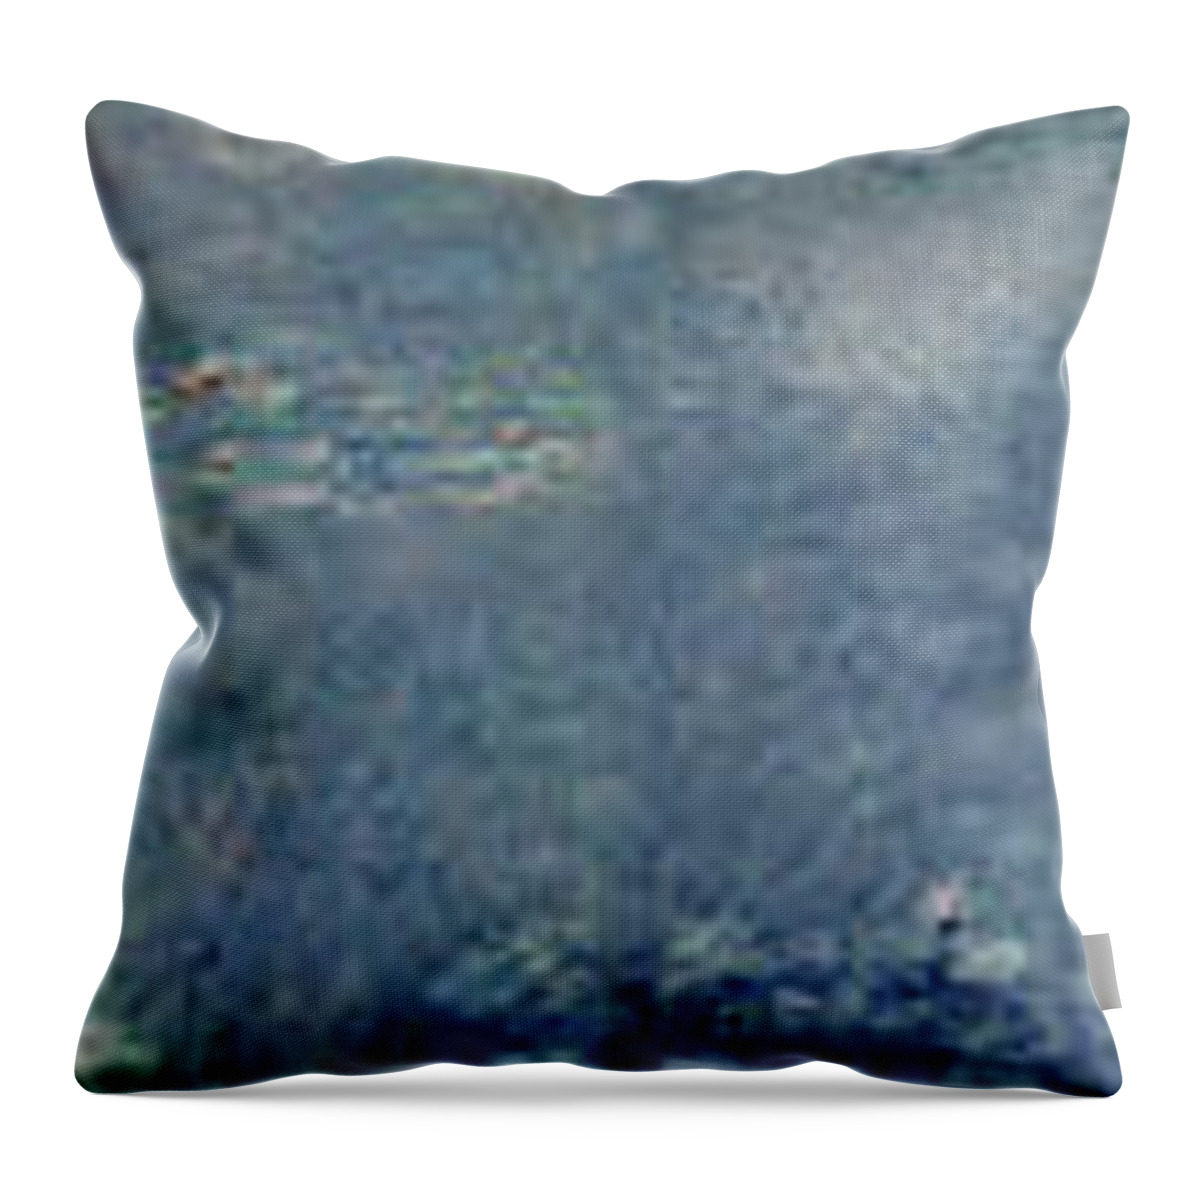 Monet Throw Pillow featuring the painting The Waterlilies, The Two Willows by Claude Monet